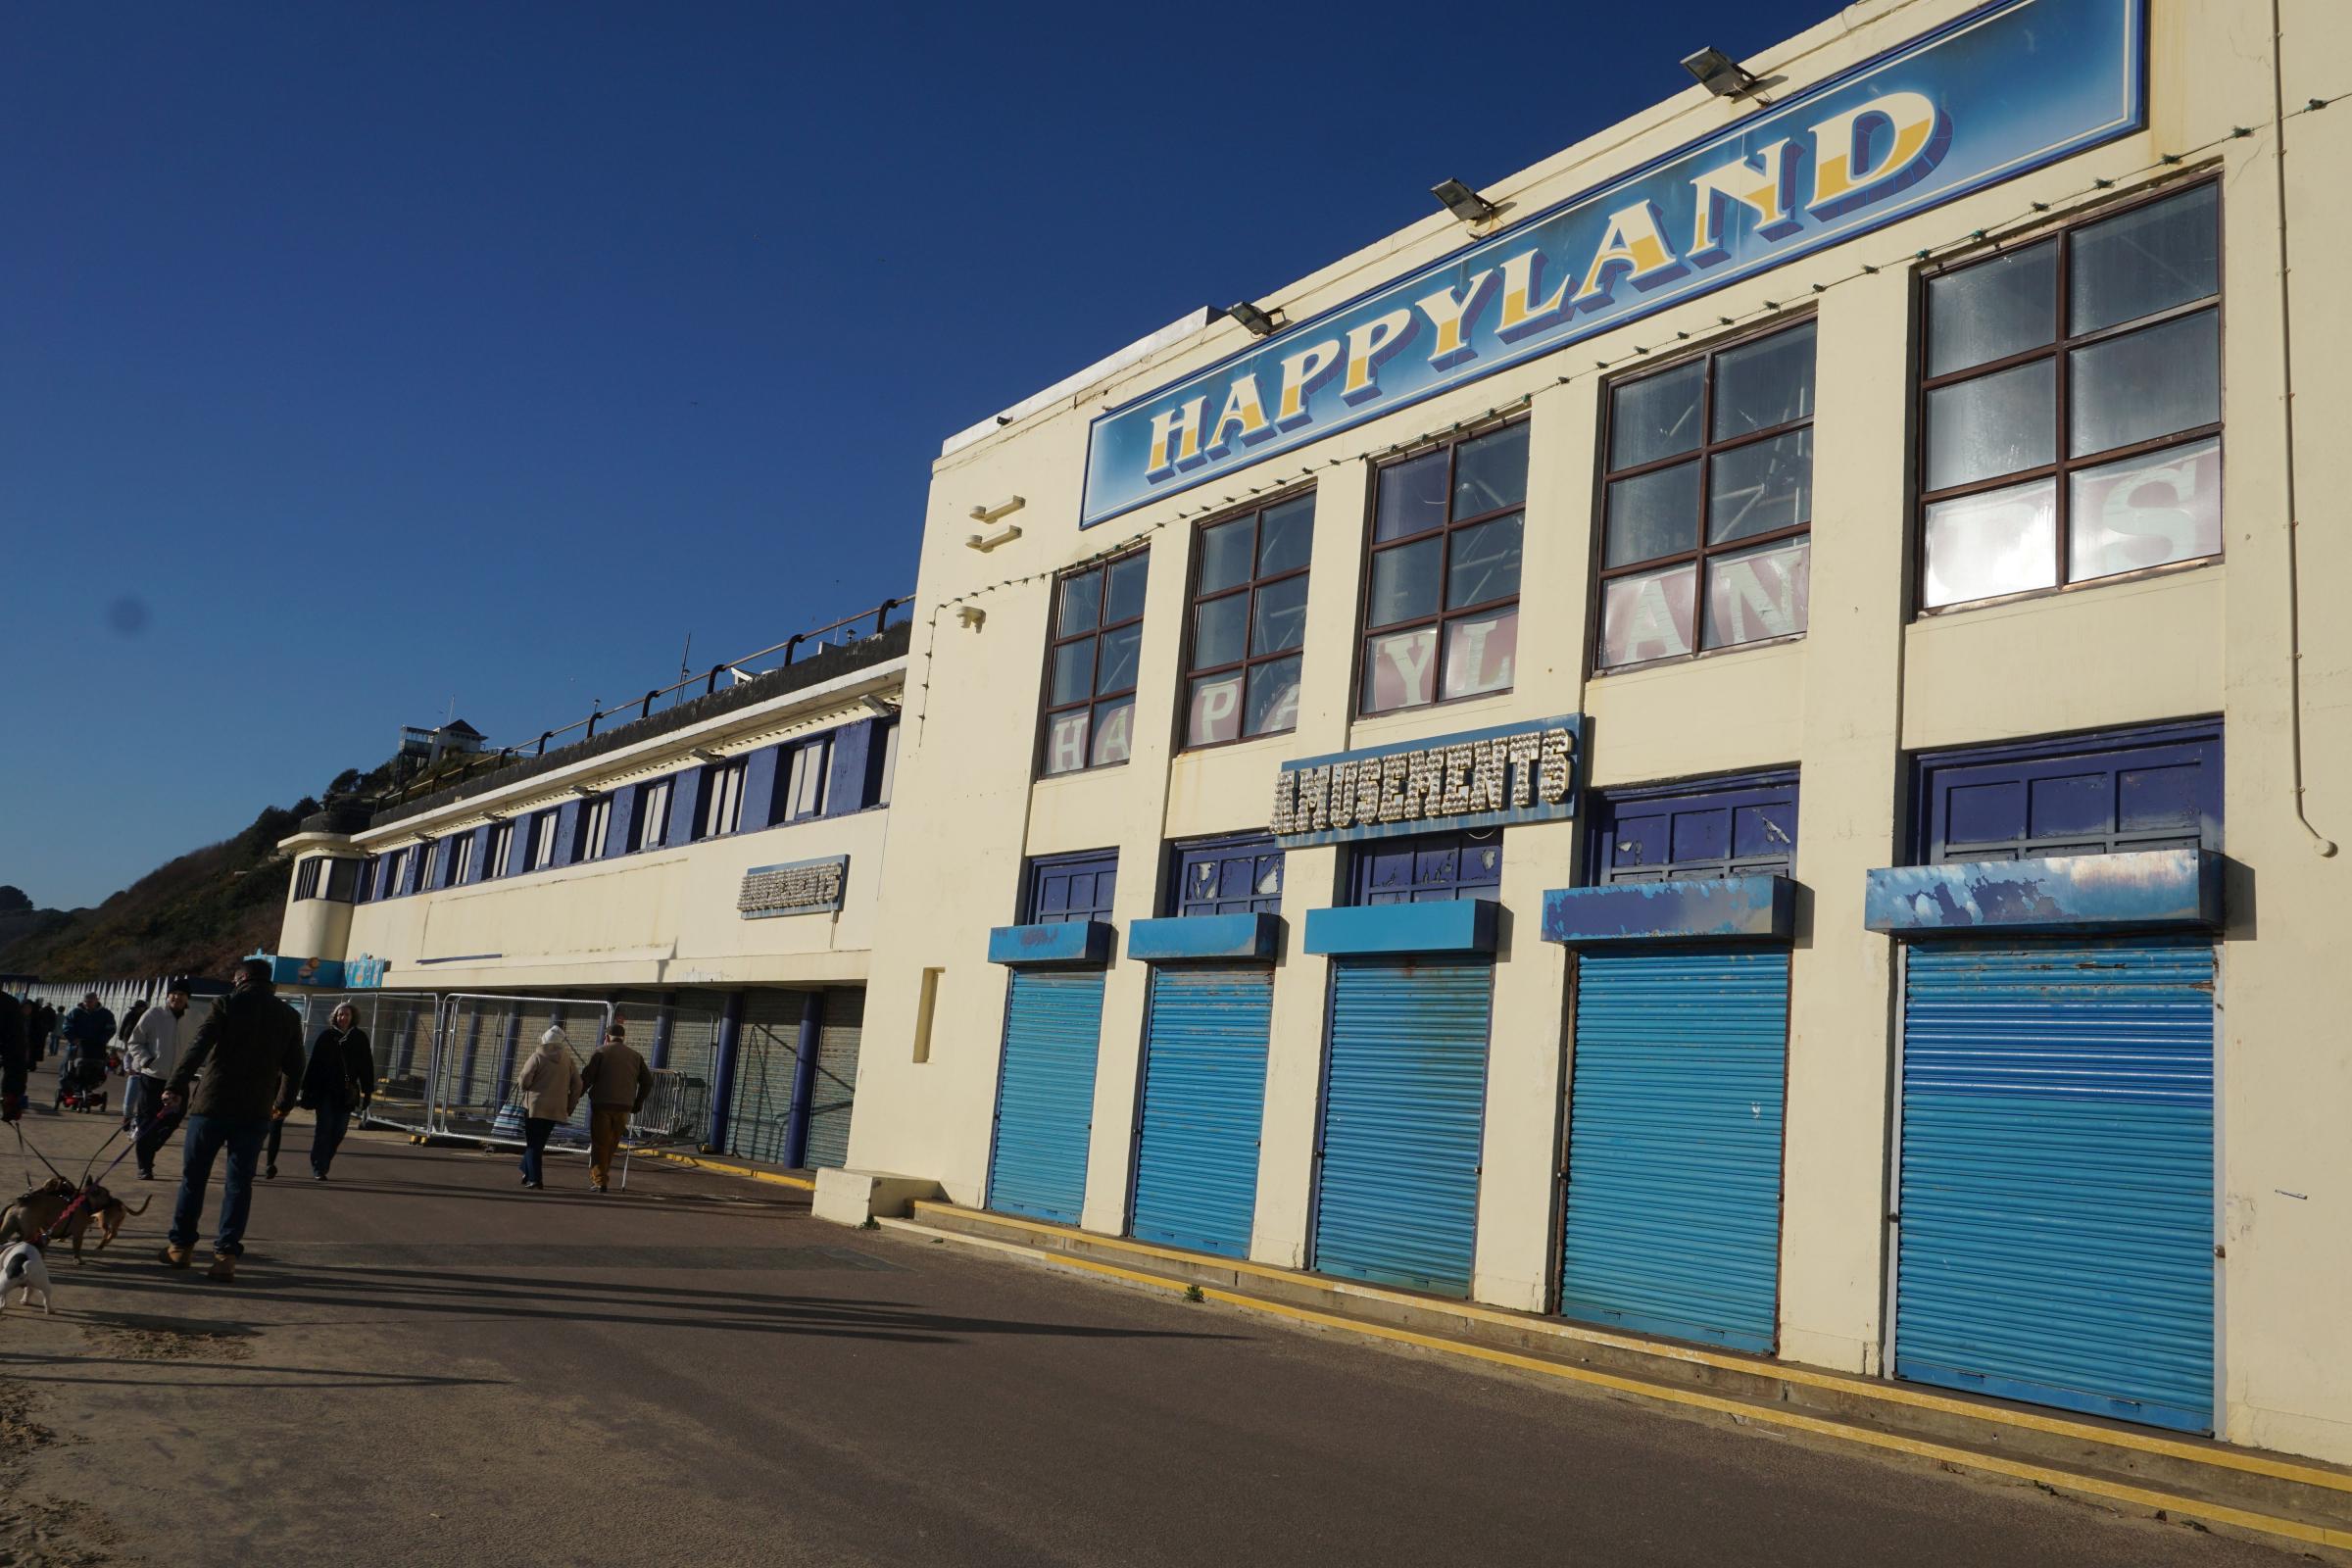 Happyland amusement arcade's future still not decided, says council - Bournemouth Echo